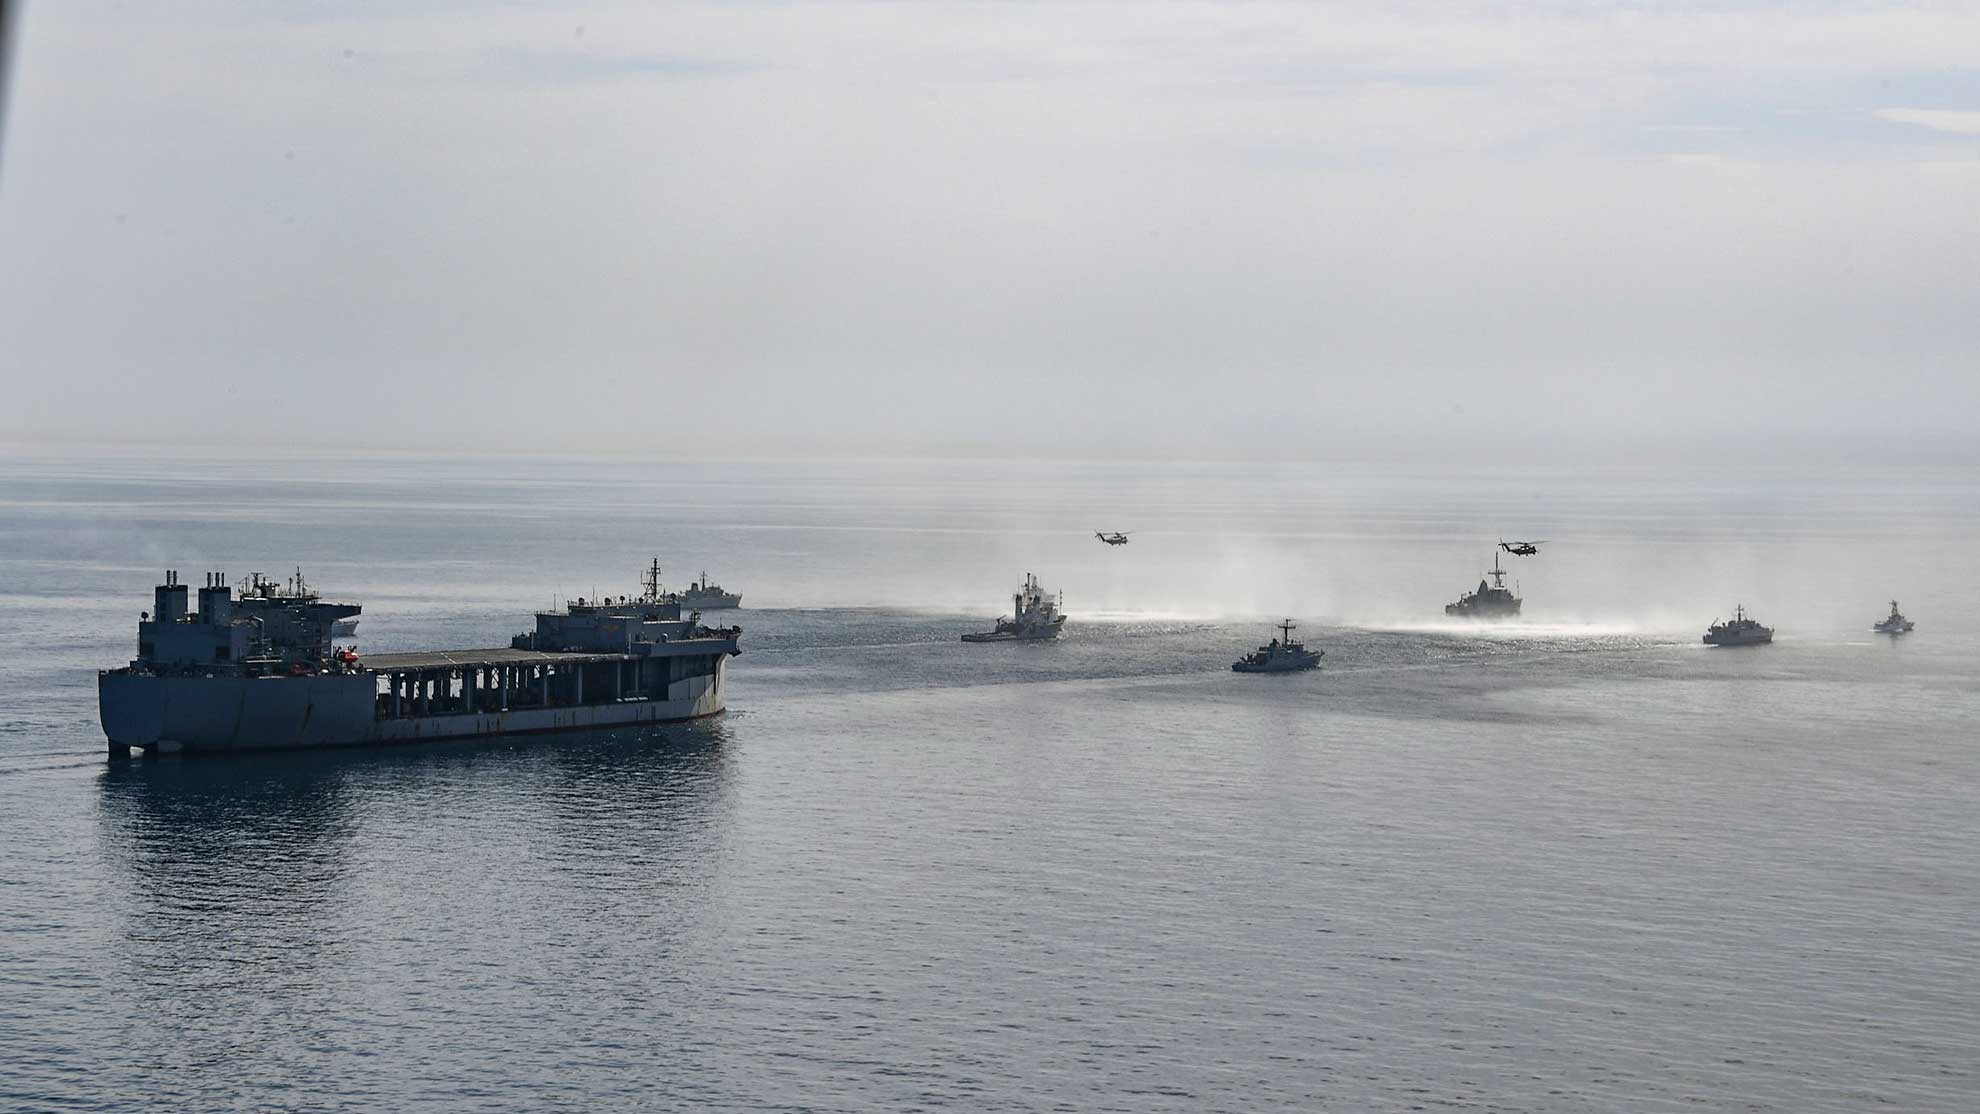 Arabian Gulf (April 10, 2019) The U.S. Navy expeditionary sea base USS Lewis B. Puller (ESB 3), fleet ocean tug USNS Catawba (T-ATF 168), Avenger-class mine countermeasures ship USS Sentry (MCM 3), U.S. Coast Guard Island-class coastal patrol boats USCGC Maui (WPB 1304) and USCGC Wrangell (WPB 1332); the Royal Navy landing ship dock RFA Cardigan Bay (L3009); the French Marine Nationale minehunters FS L'Aigle (M647) and FS Sagittaire (M650); the Royal Navy minehunters HMS Shoreham (M112) and HMS Ledbury (M30); and Mine Countermeasures Squadron (HM) 15 MH-53E Sea Dragon helicopters navigate the Arabian Gulf in formation during Artemis Trident 19. Artemis Trident is a mine countermeasures exercise conducted by France's Marine Nationale, the Royal Navy and the U.S. Navy in the Arabian Gulf focused on increasing interoperability and demonstrating the nations' shared commitment to ensuring unfettered maritime operations -- U.S. Navy photo by MCS 2nd Class Samantha P. Montenegro. -